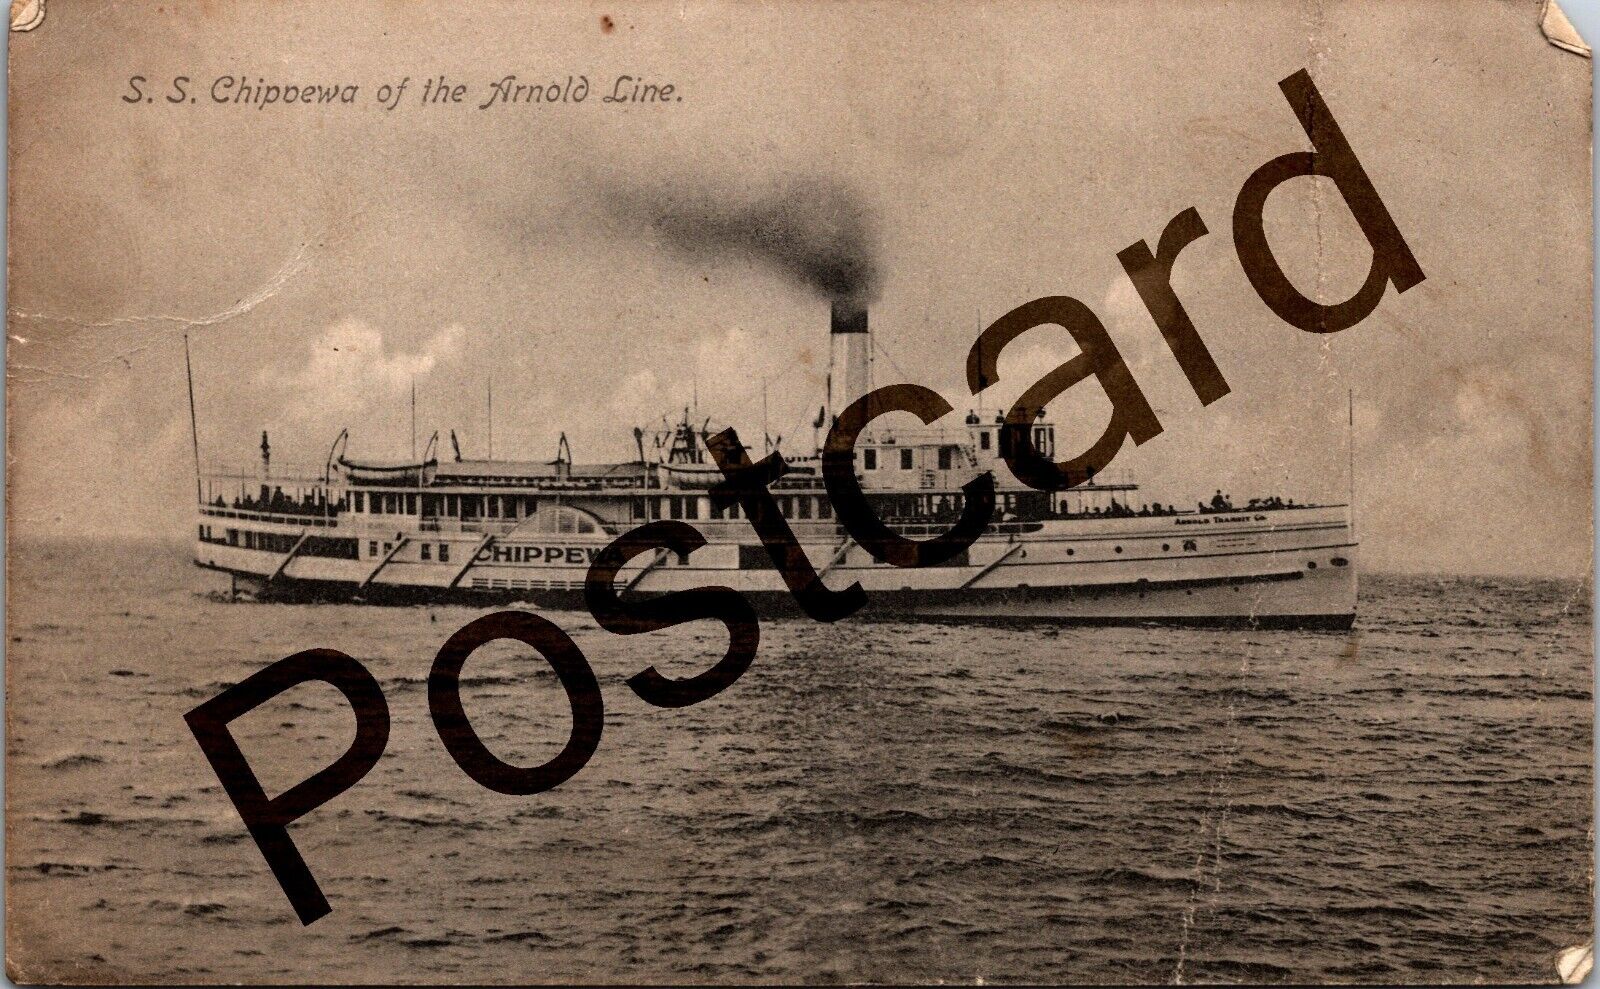 1912 S.S. Chippewa of the Arnold Line, G.H. Wickman postcard jj143